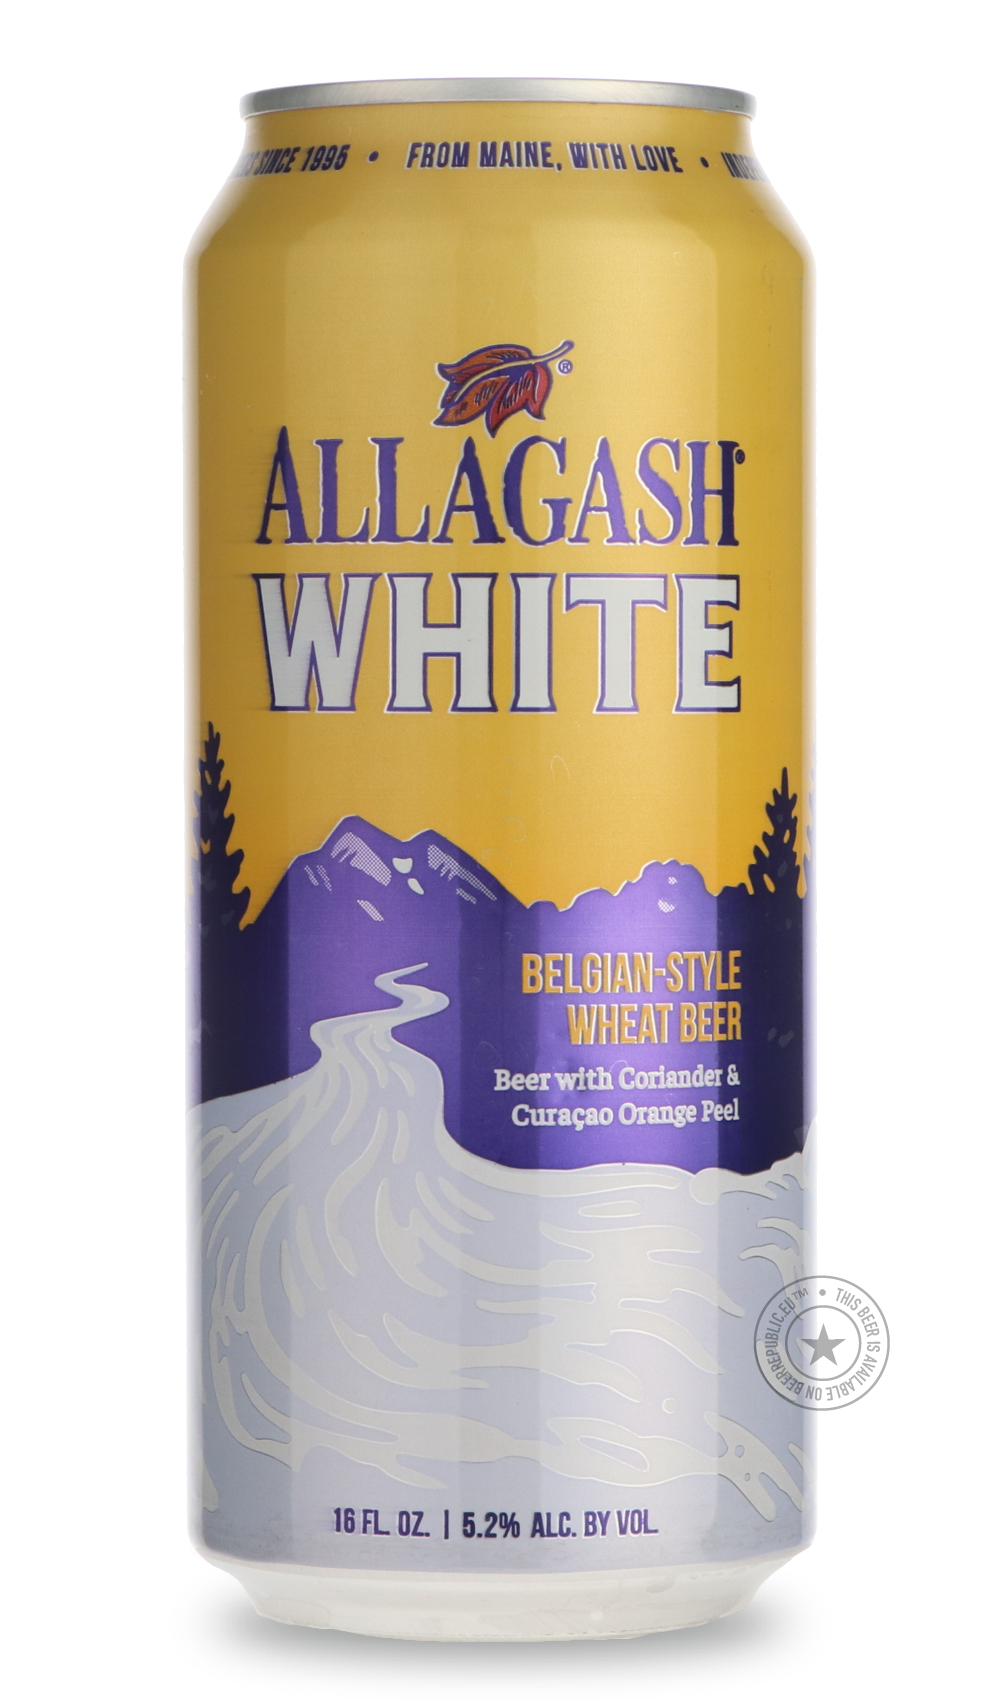 -Allagash- White [473ml can]-Pale- Only @ Beer Republic - The best online beer store for American & Canadian craft beer - Buy beer online from the USA and Canada - Bier online kopen - Amerikaans bier kopen - Craft beer store - Craft beer kopen - Amerikanisch bier kaufen - Bier online kaufen - Acheter biere online - IPA - Stout - Porter - New England IPA - Hazy IPA - Imperial Stout - Barrel Aged - Barrel Aged Imperial Stout - Brown - Dark beer - Blond - Blonde - Pilsner - Lager - Wheat - Weizen - Amber - Bar